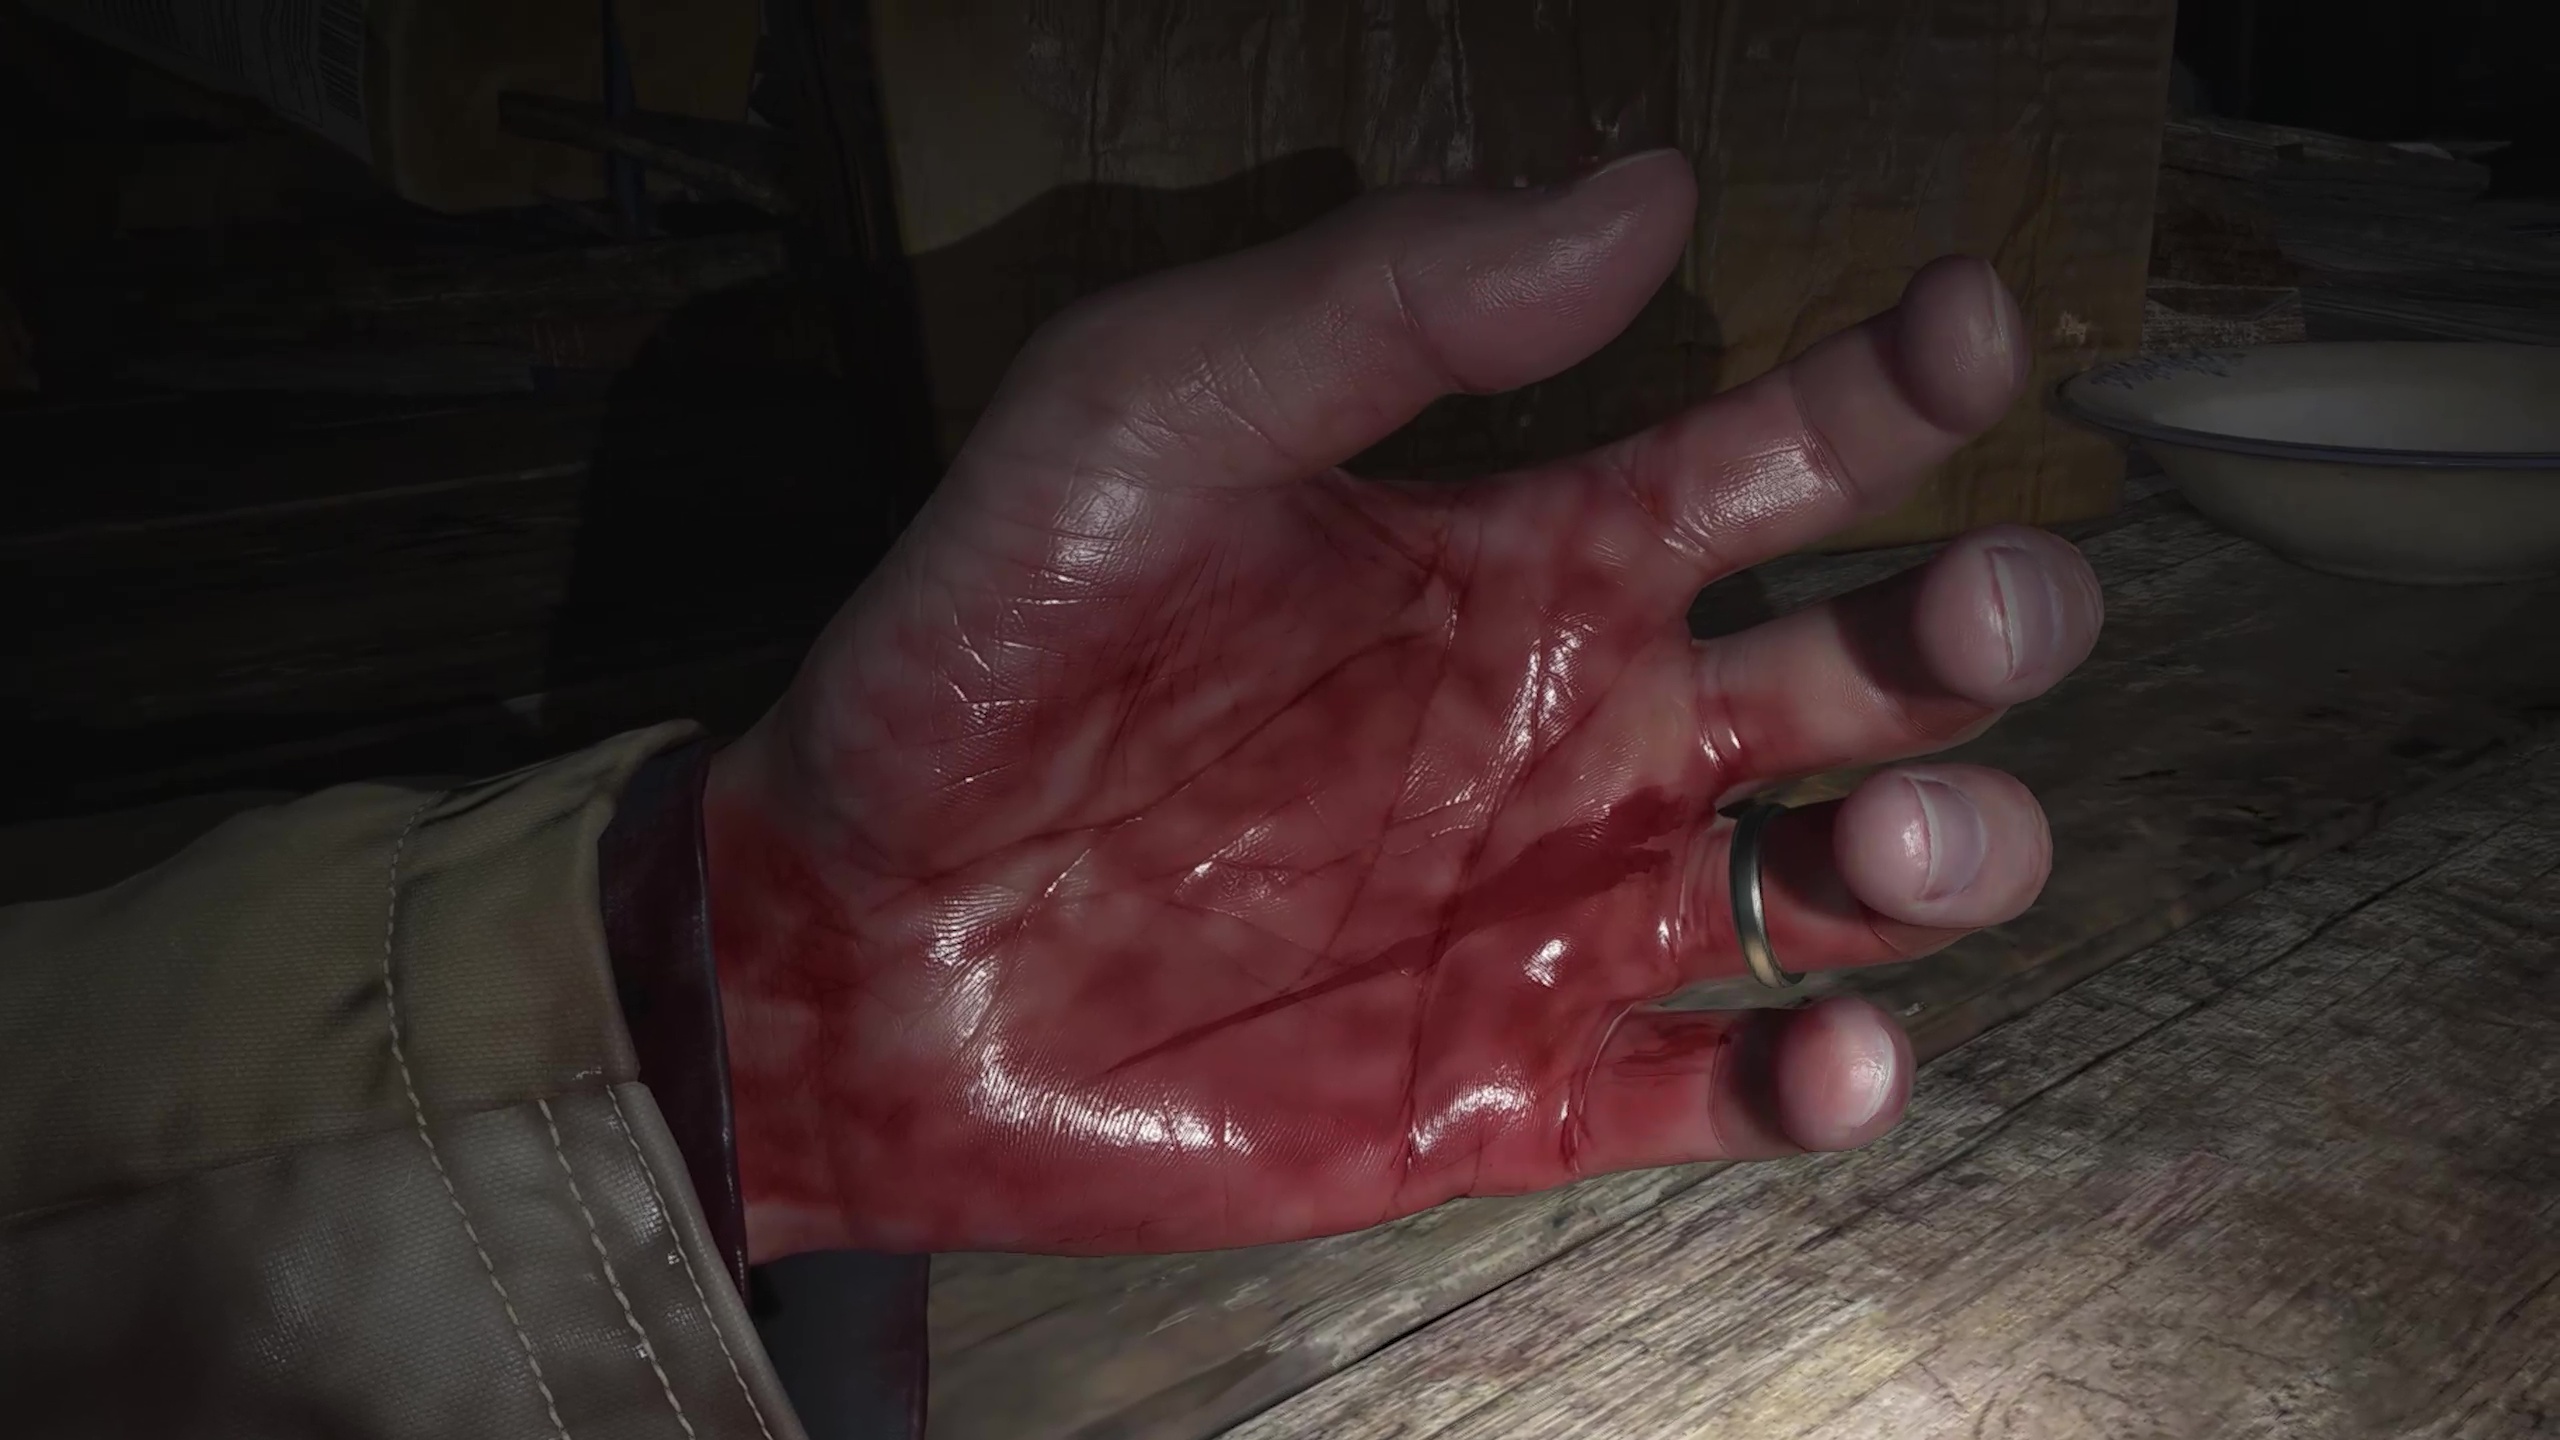  Unrelenting hand gore is the true highlight of Resident Evil Village 